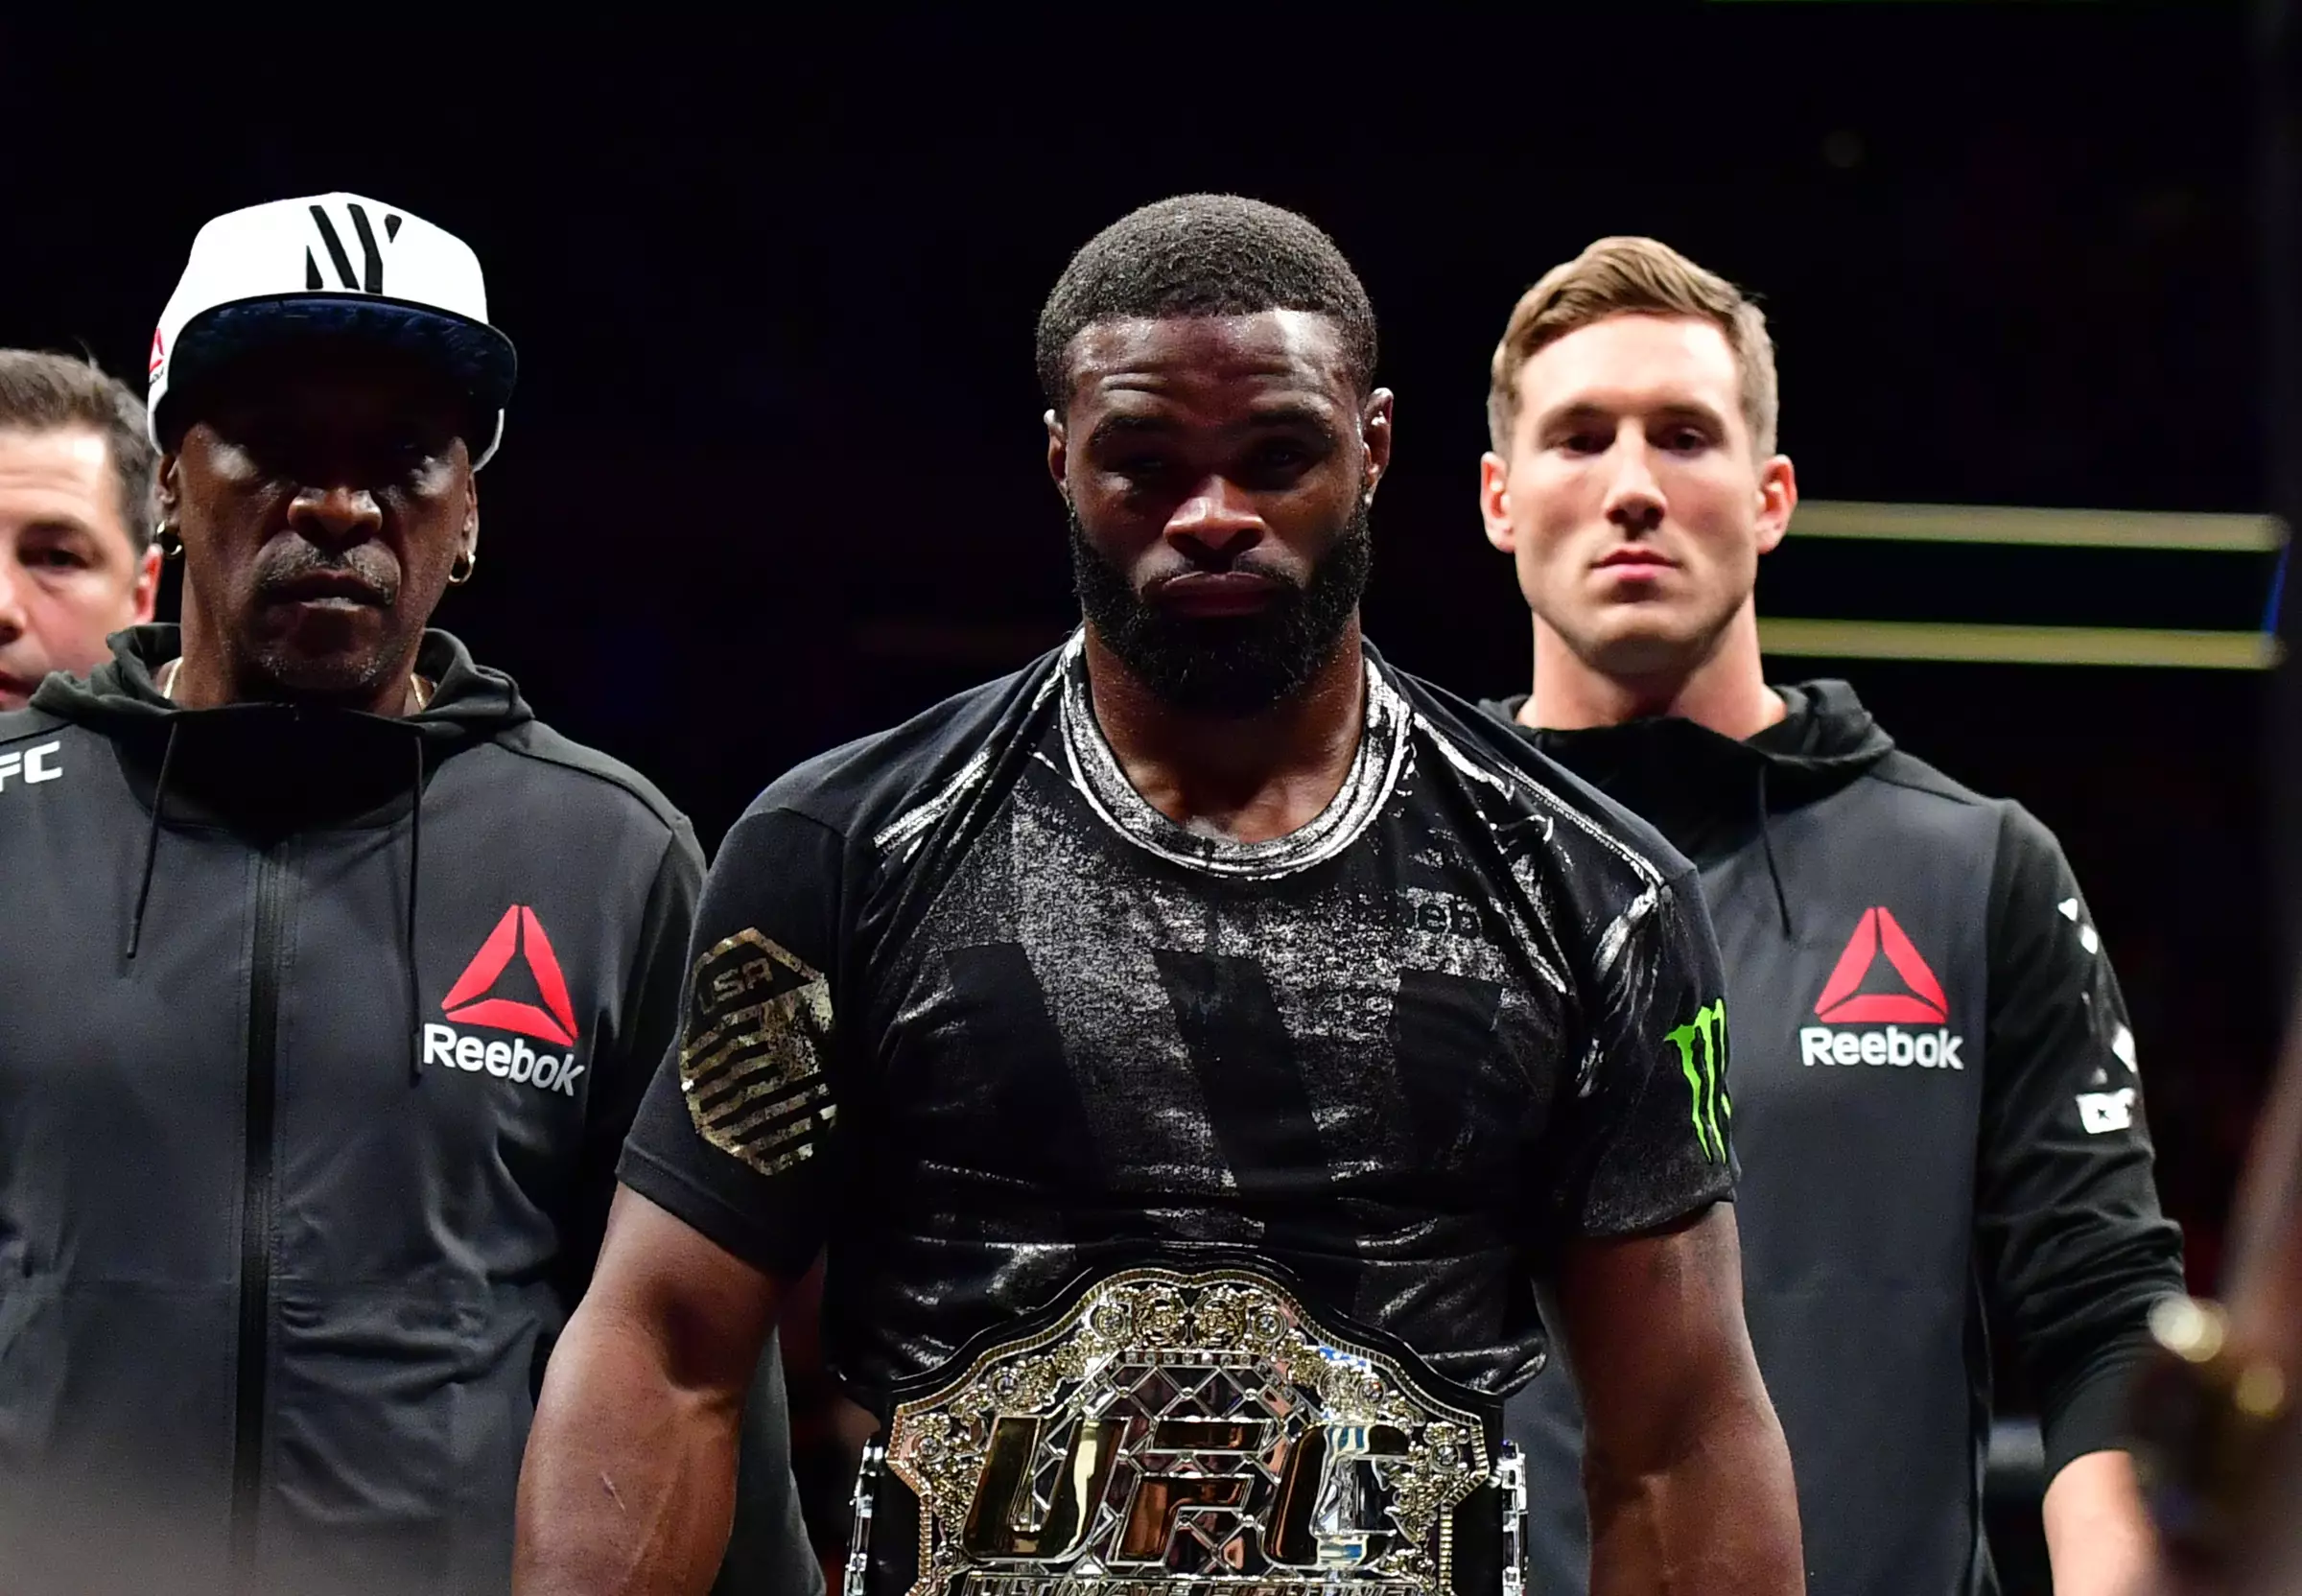 Who Is Jake Paul's Next Opponent Tyron Woodley?